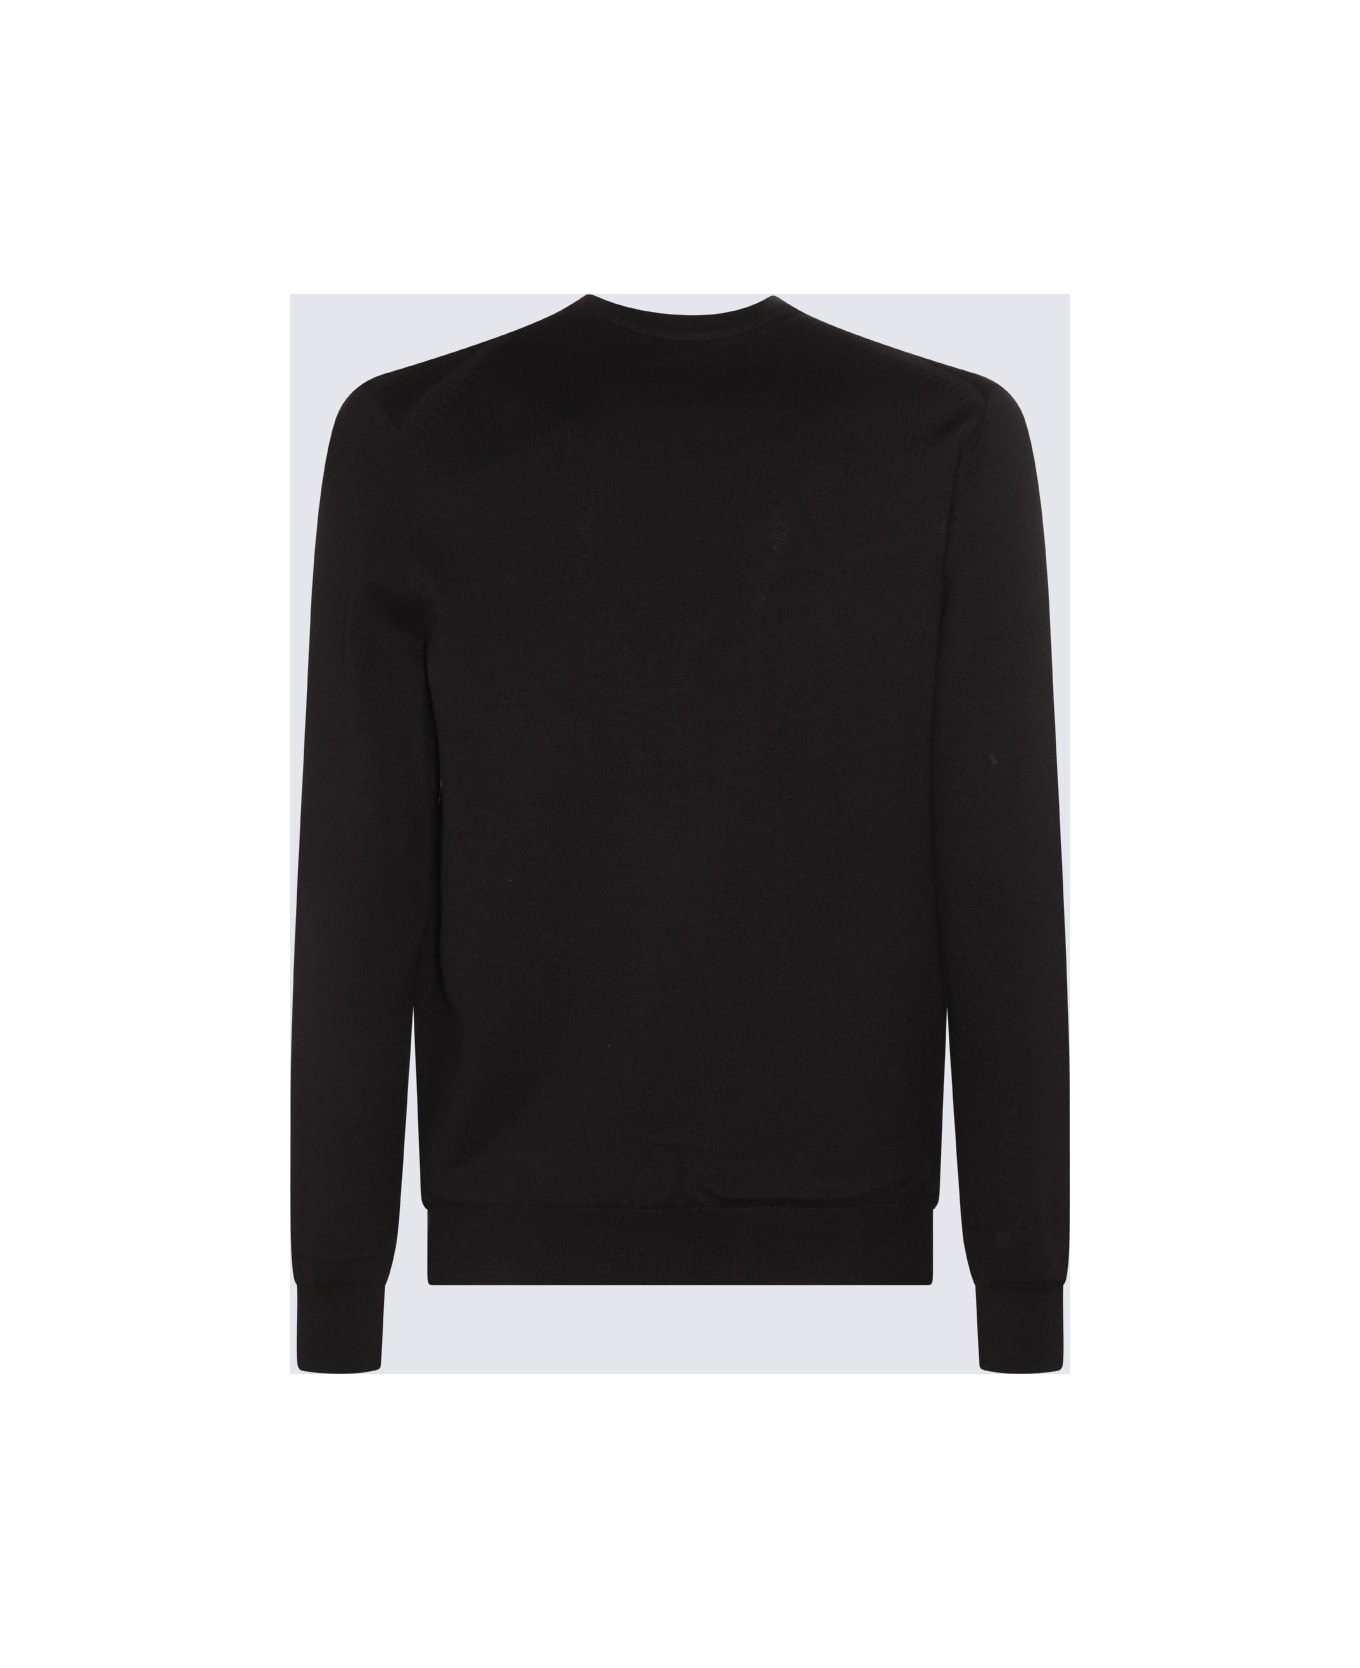 Fred Perry Black Cotton-wool Blend Jumper - Black